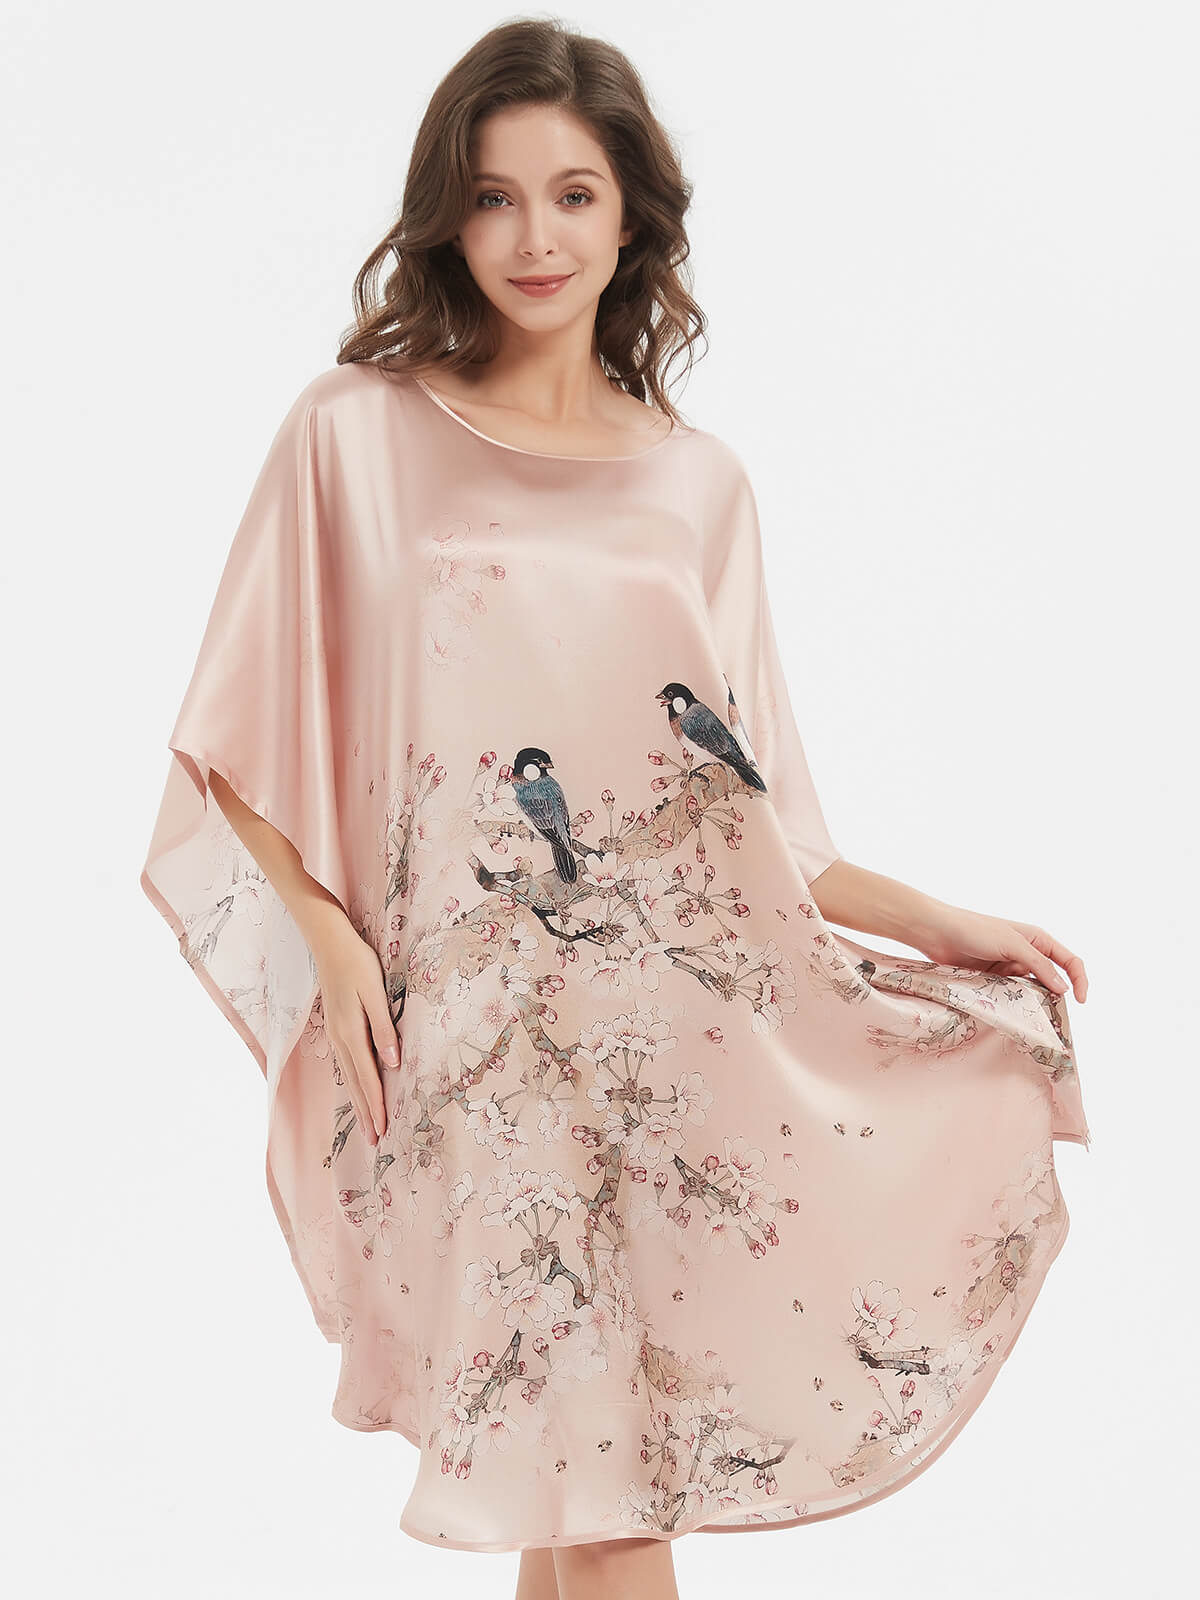 Birds and Blossom Print Champagne Silk Nightgown